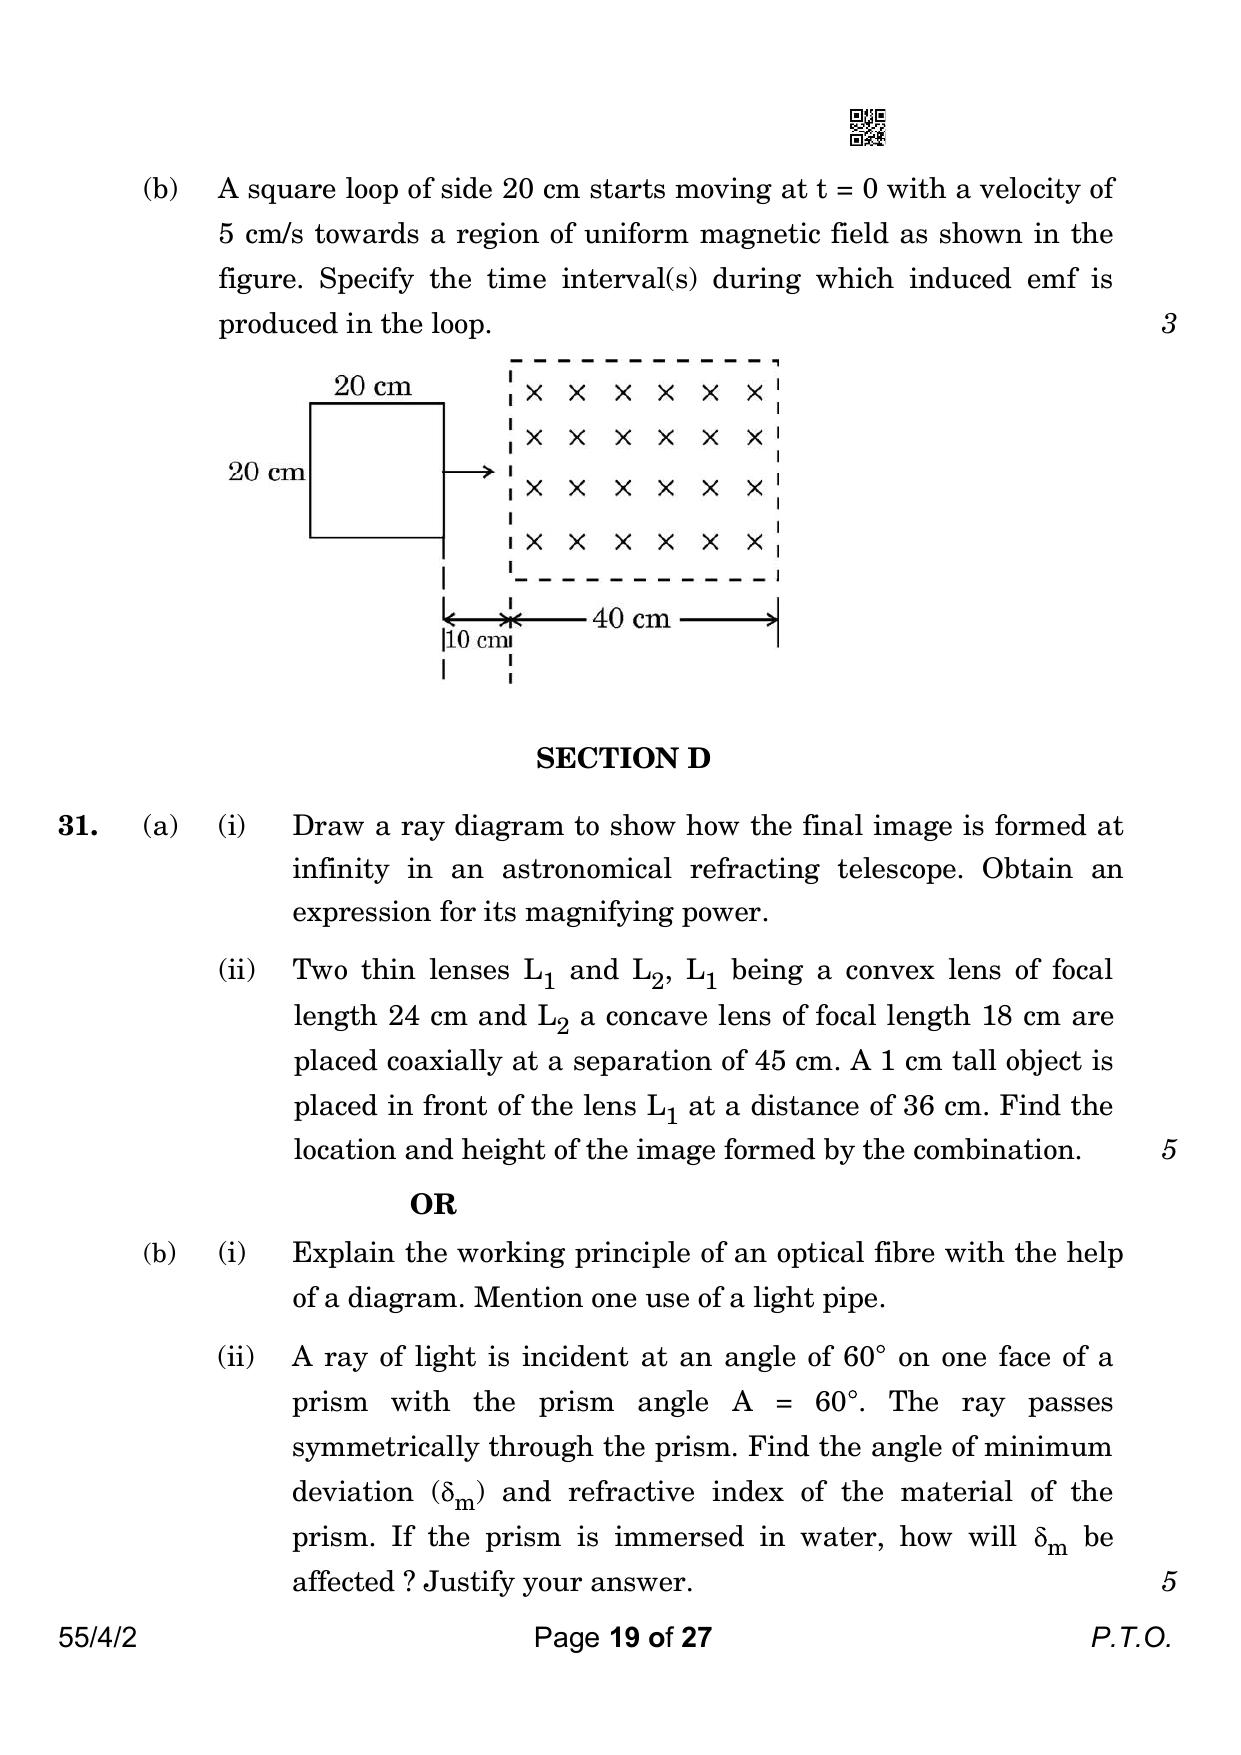 CBSE Class 12 55-4-2 Physics 2023 Question Paper - Page 19